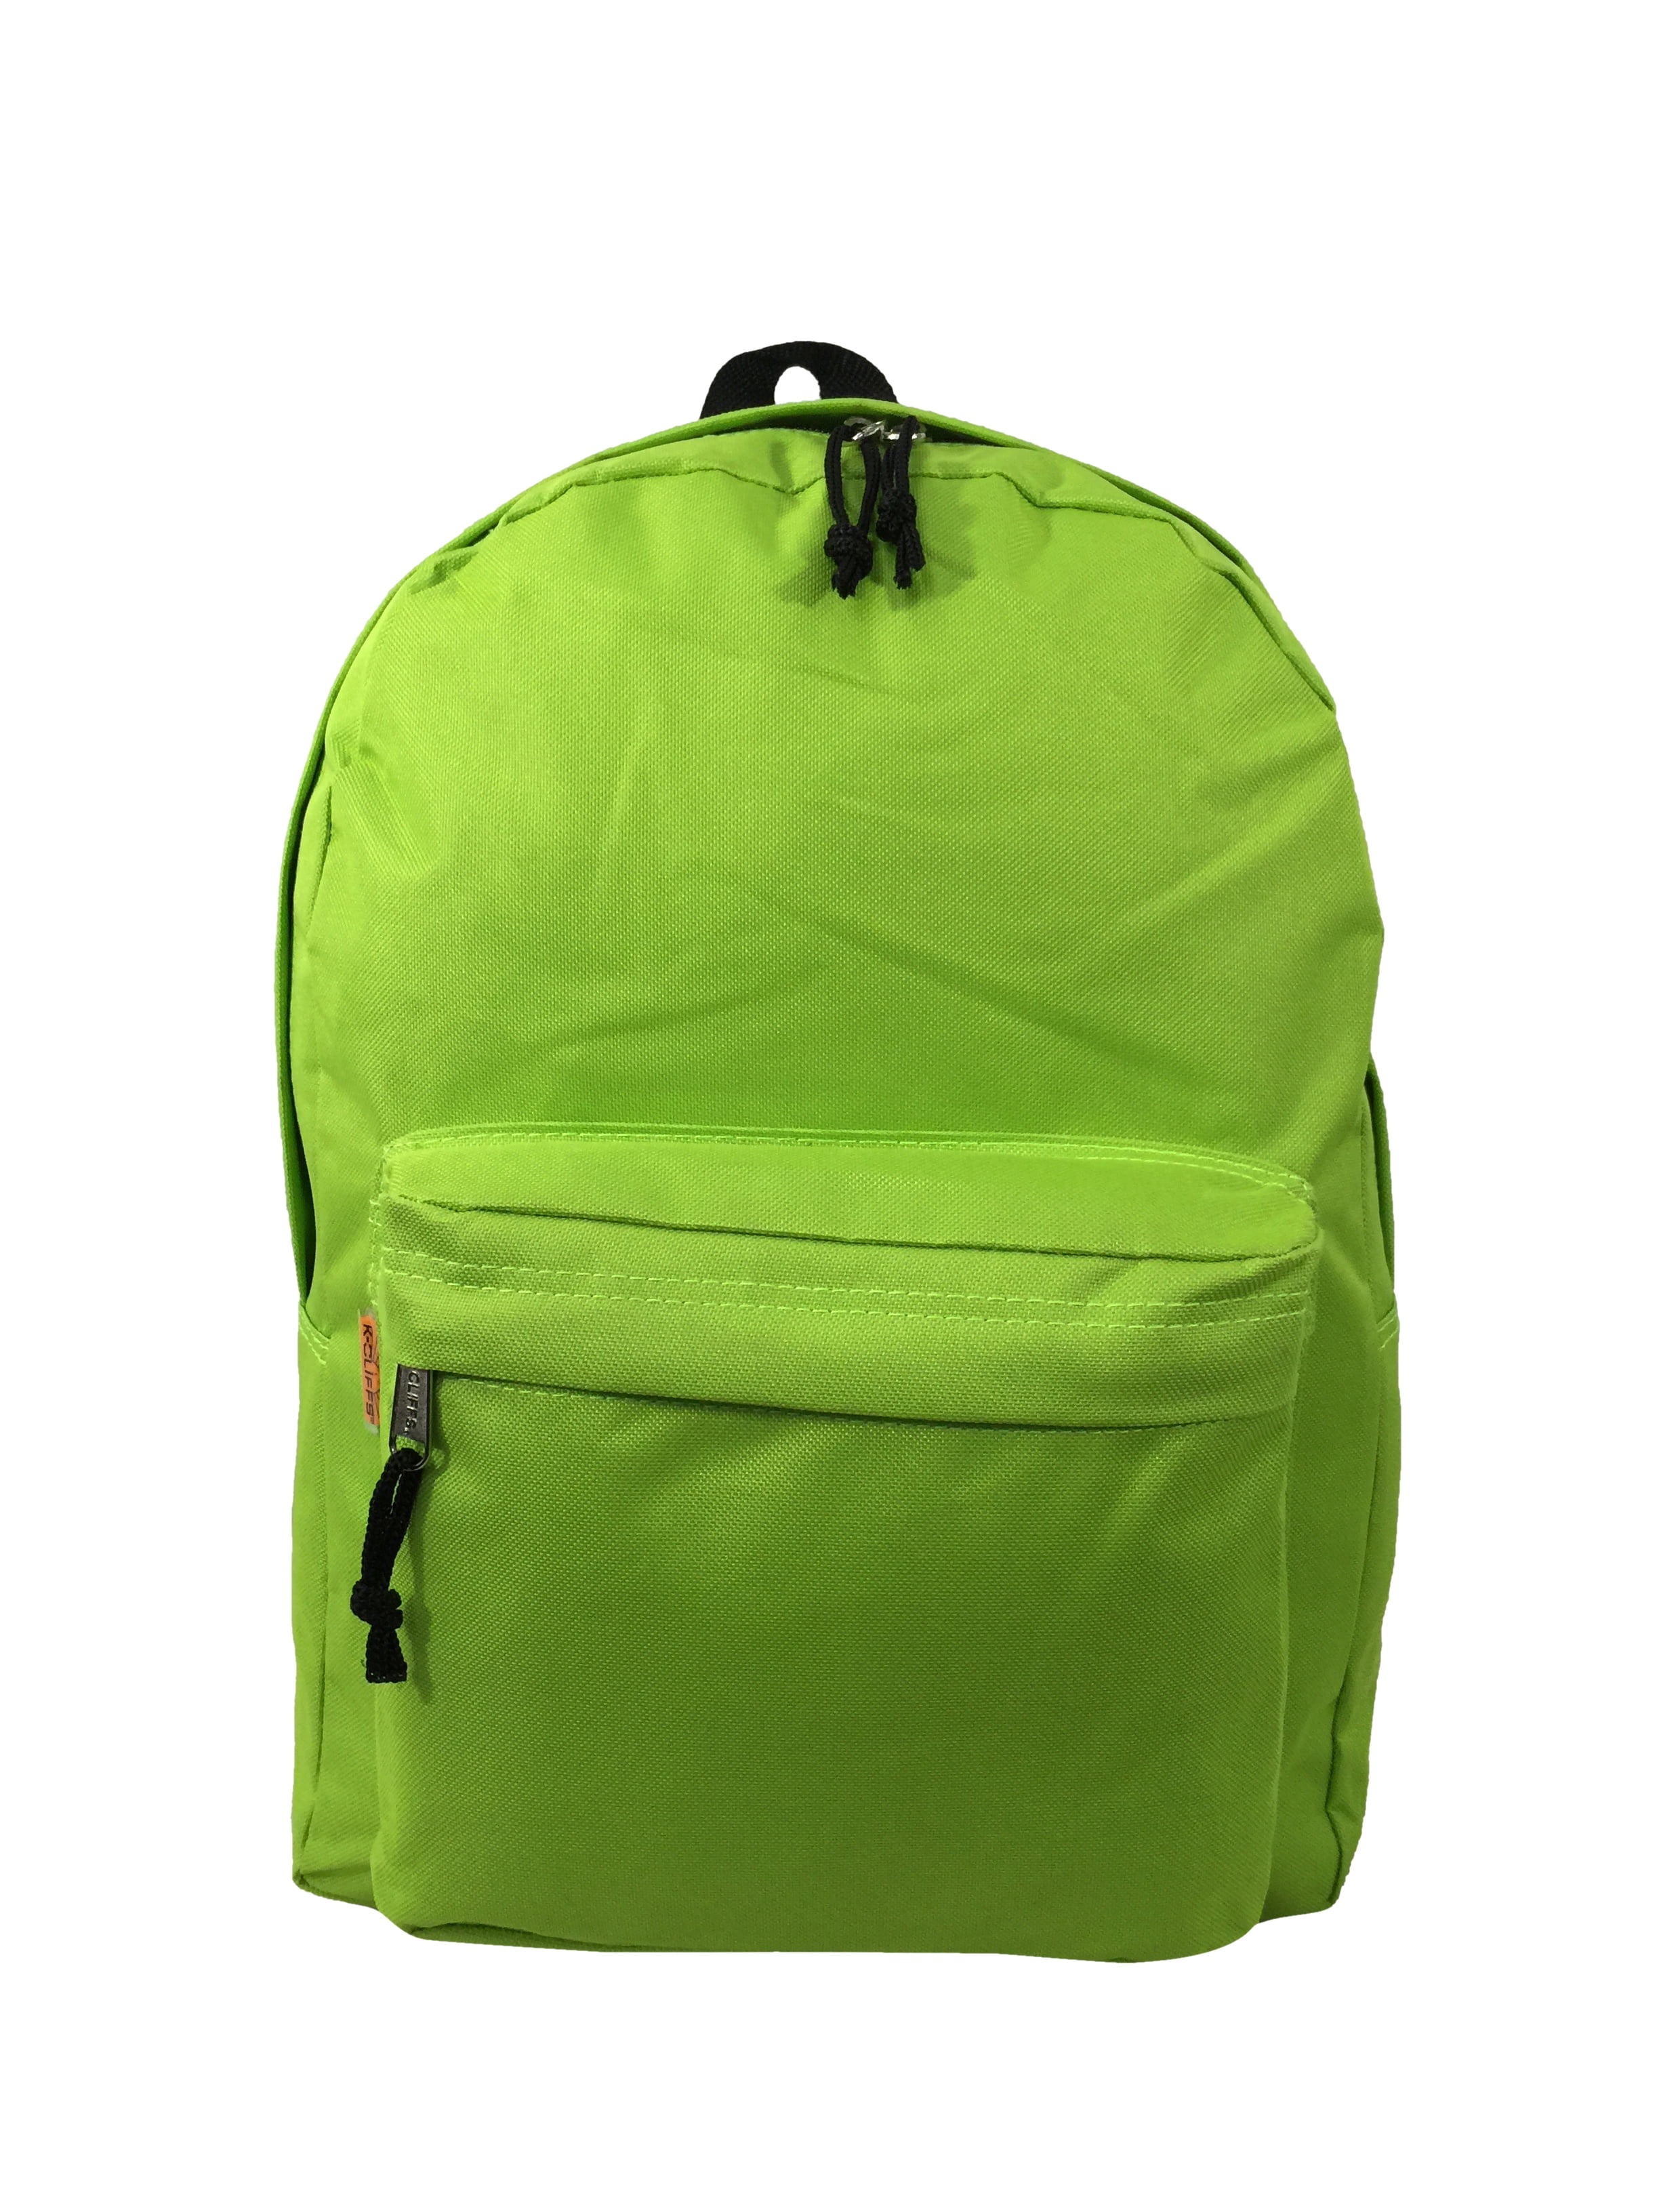 Cotton Canvas Sport Backpack  Simply + Green Solutions — Simply+Green  Solutions